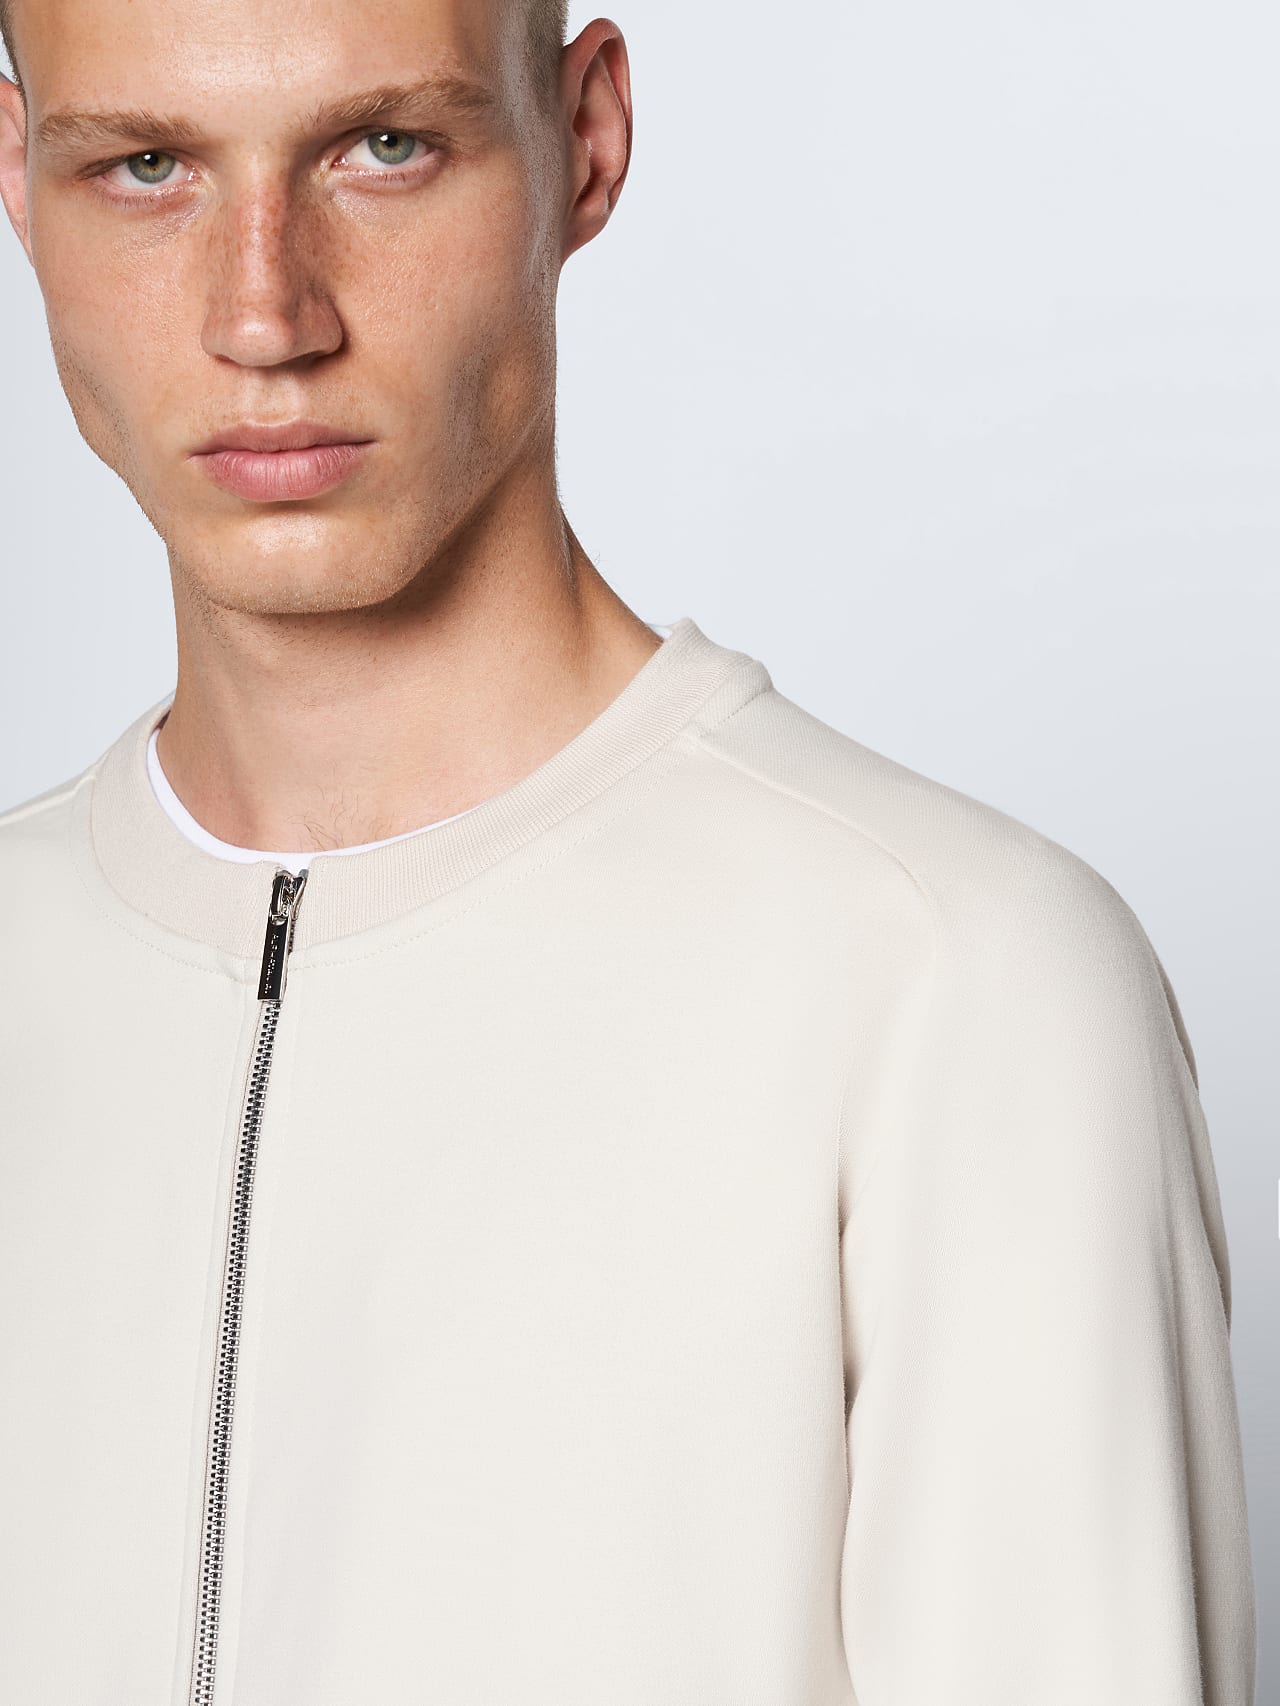 AlphaTauri | SEONE V1.Y6.01 | Sweat Jacket with Logo Embroidery in offwhite for Men